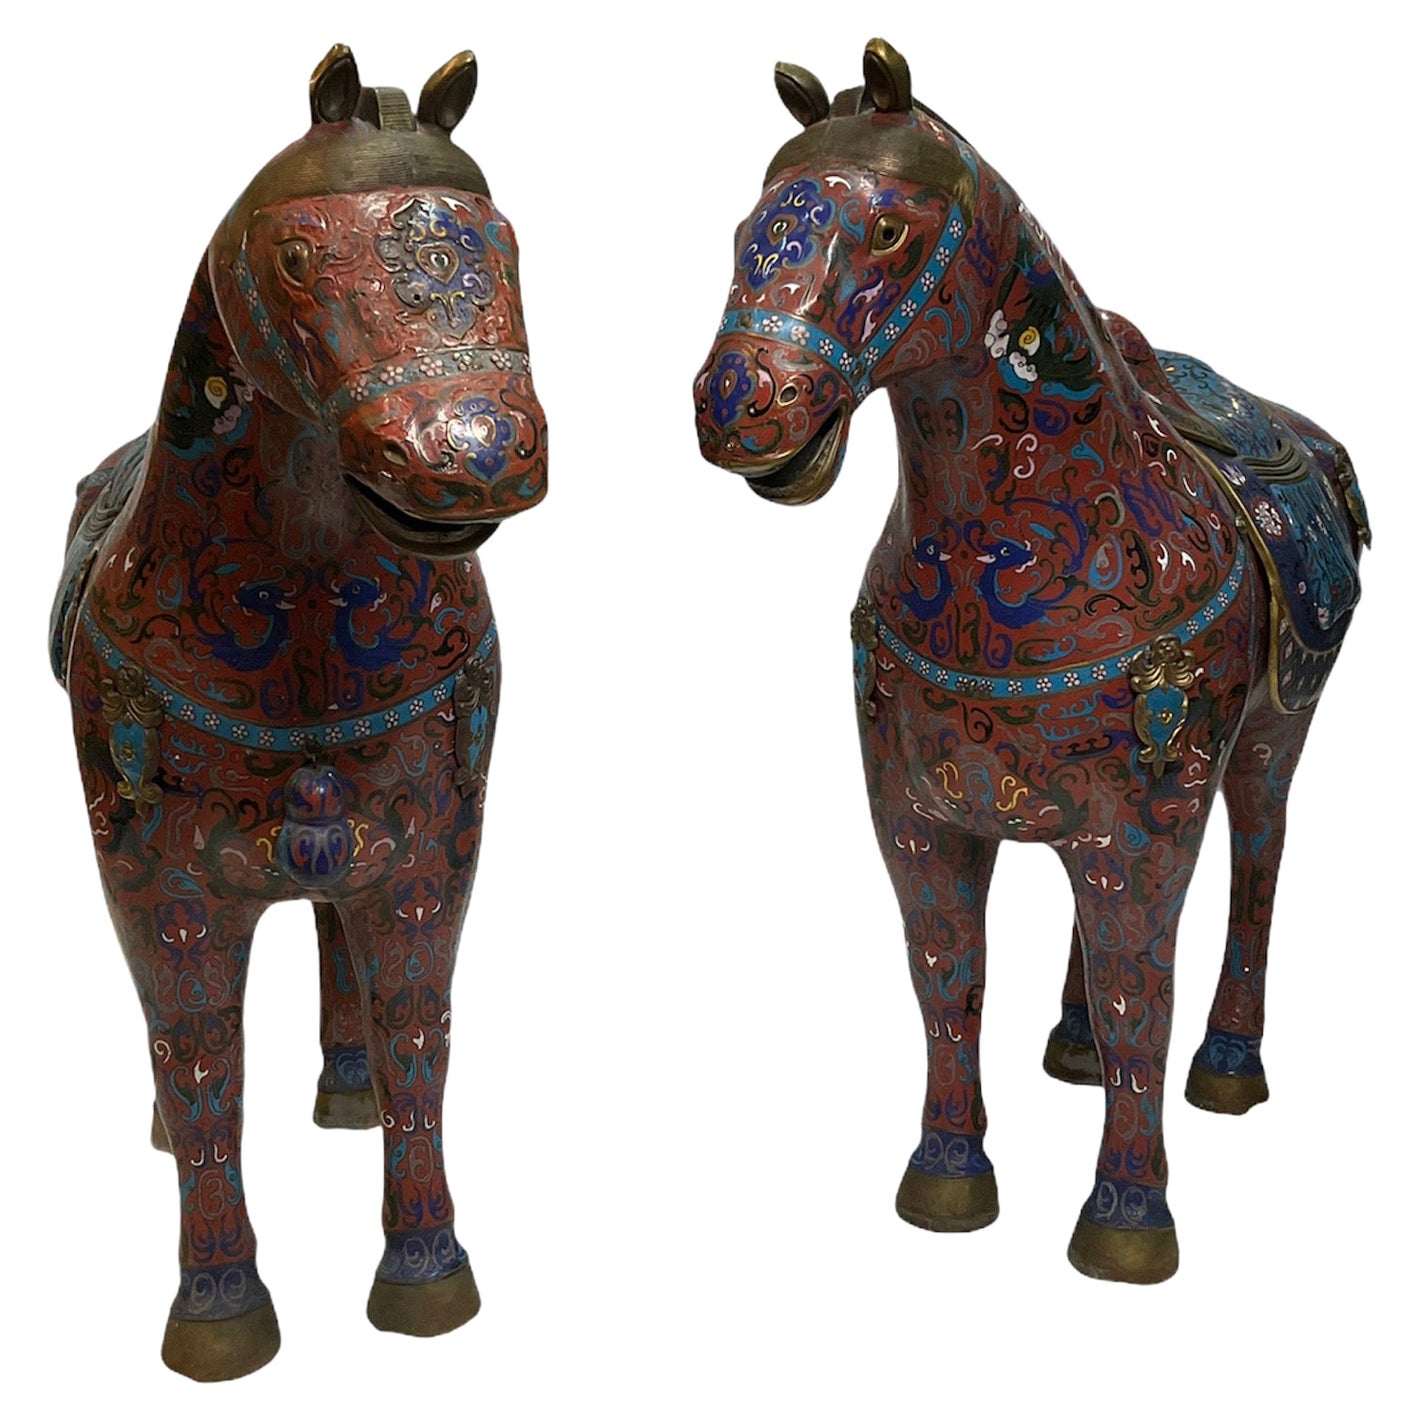 Pair of Chinese Polychromatic Enamel Cloisonné Brass Horse Sculptures